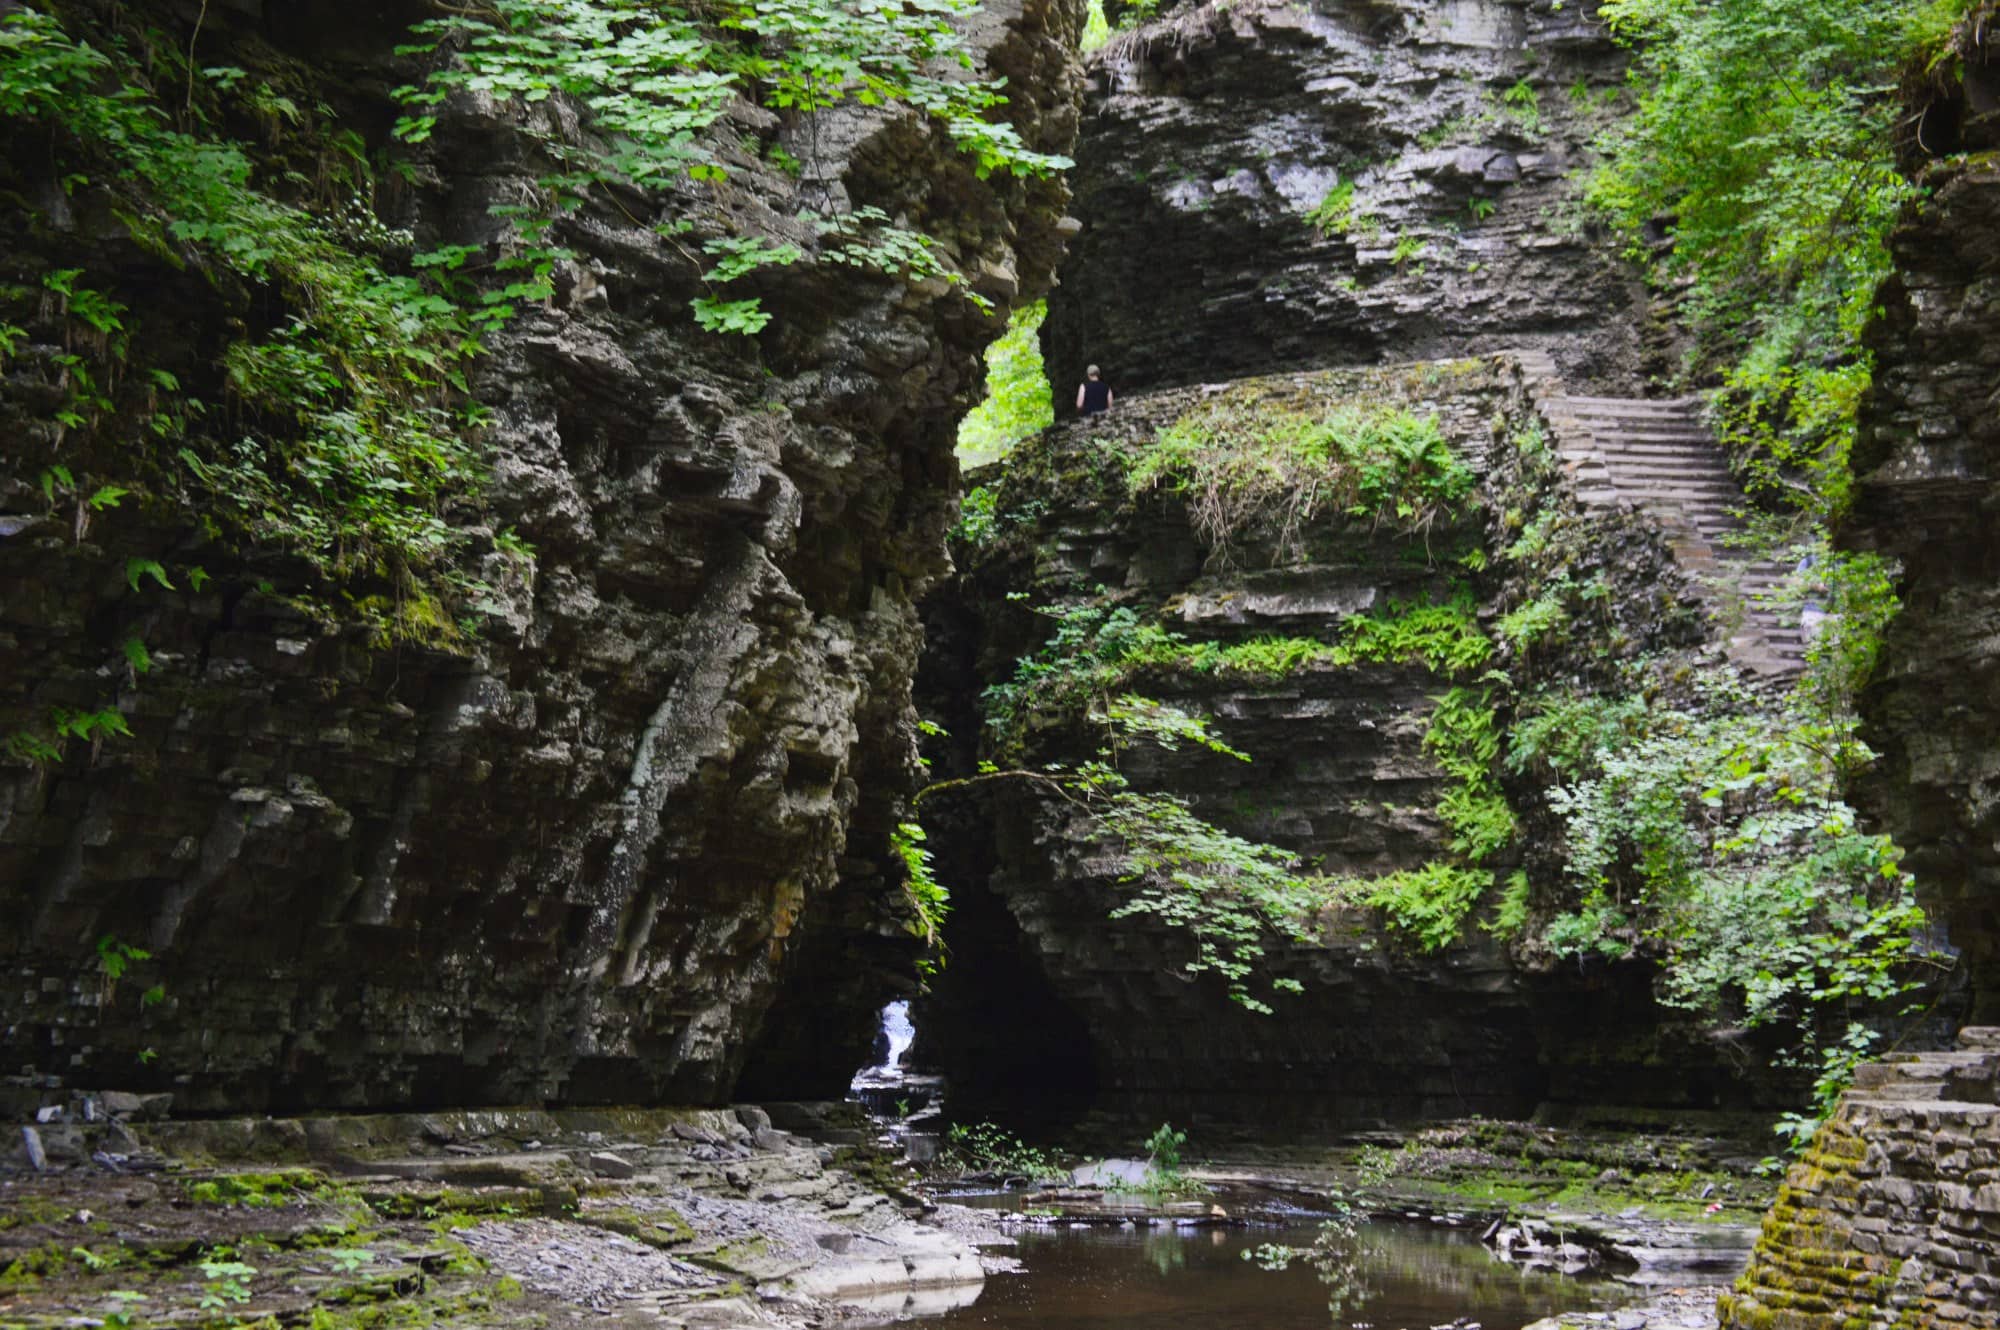 Watkins Glen State Park // Explore the East Coast with these 5 adventurous road trip ideas from Maine to North Carolina to the Florida coast.